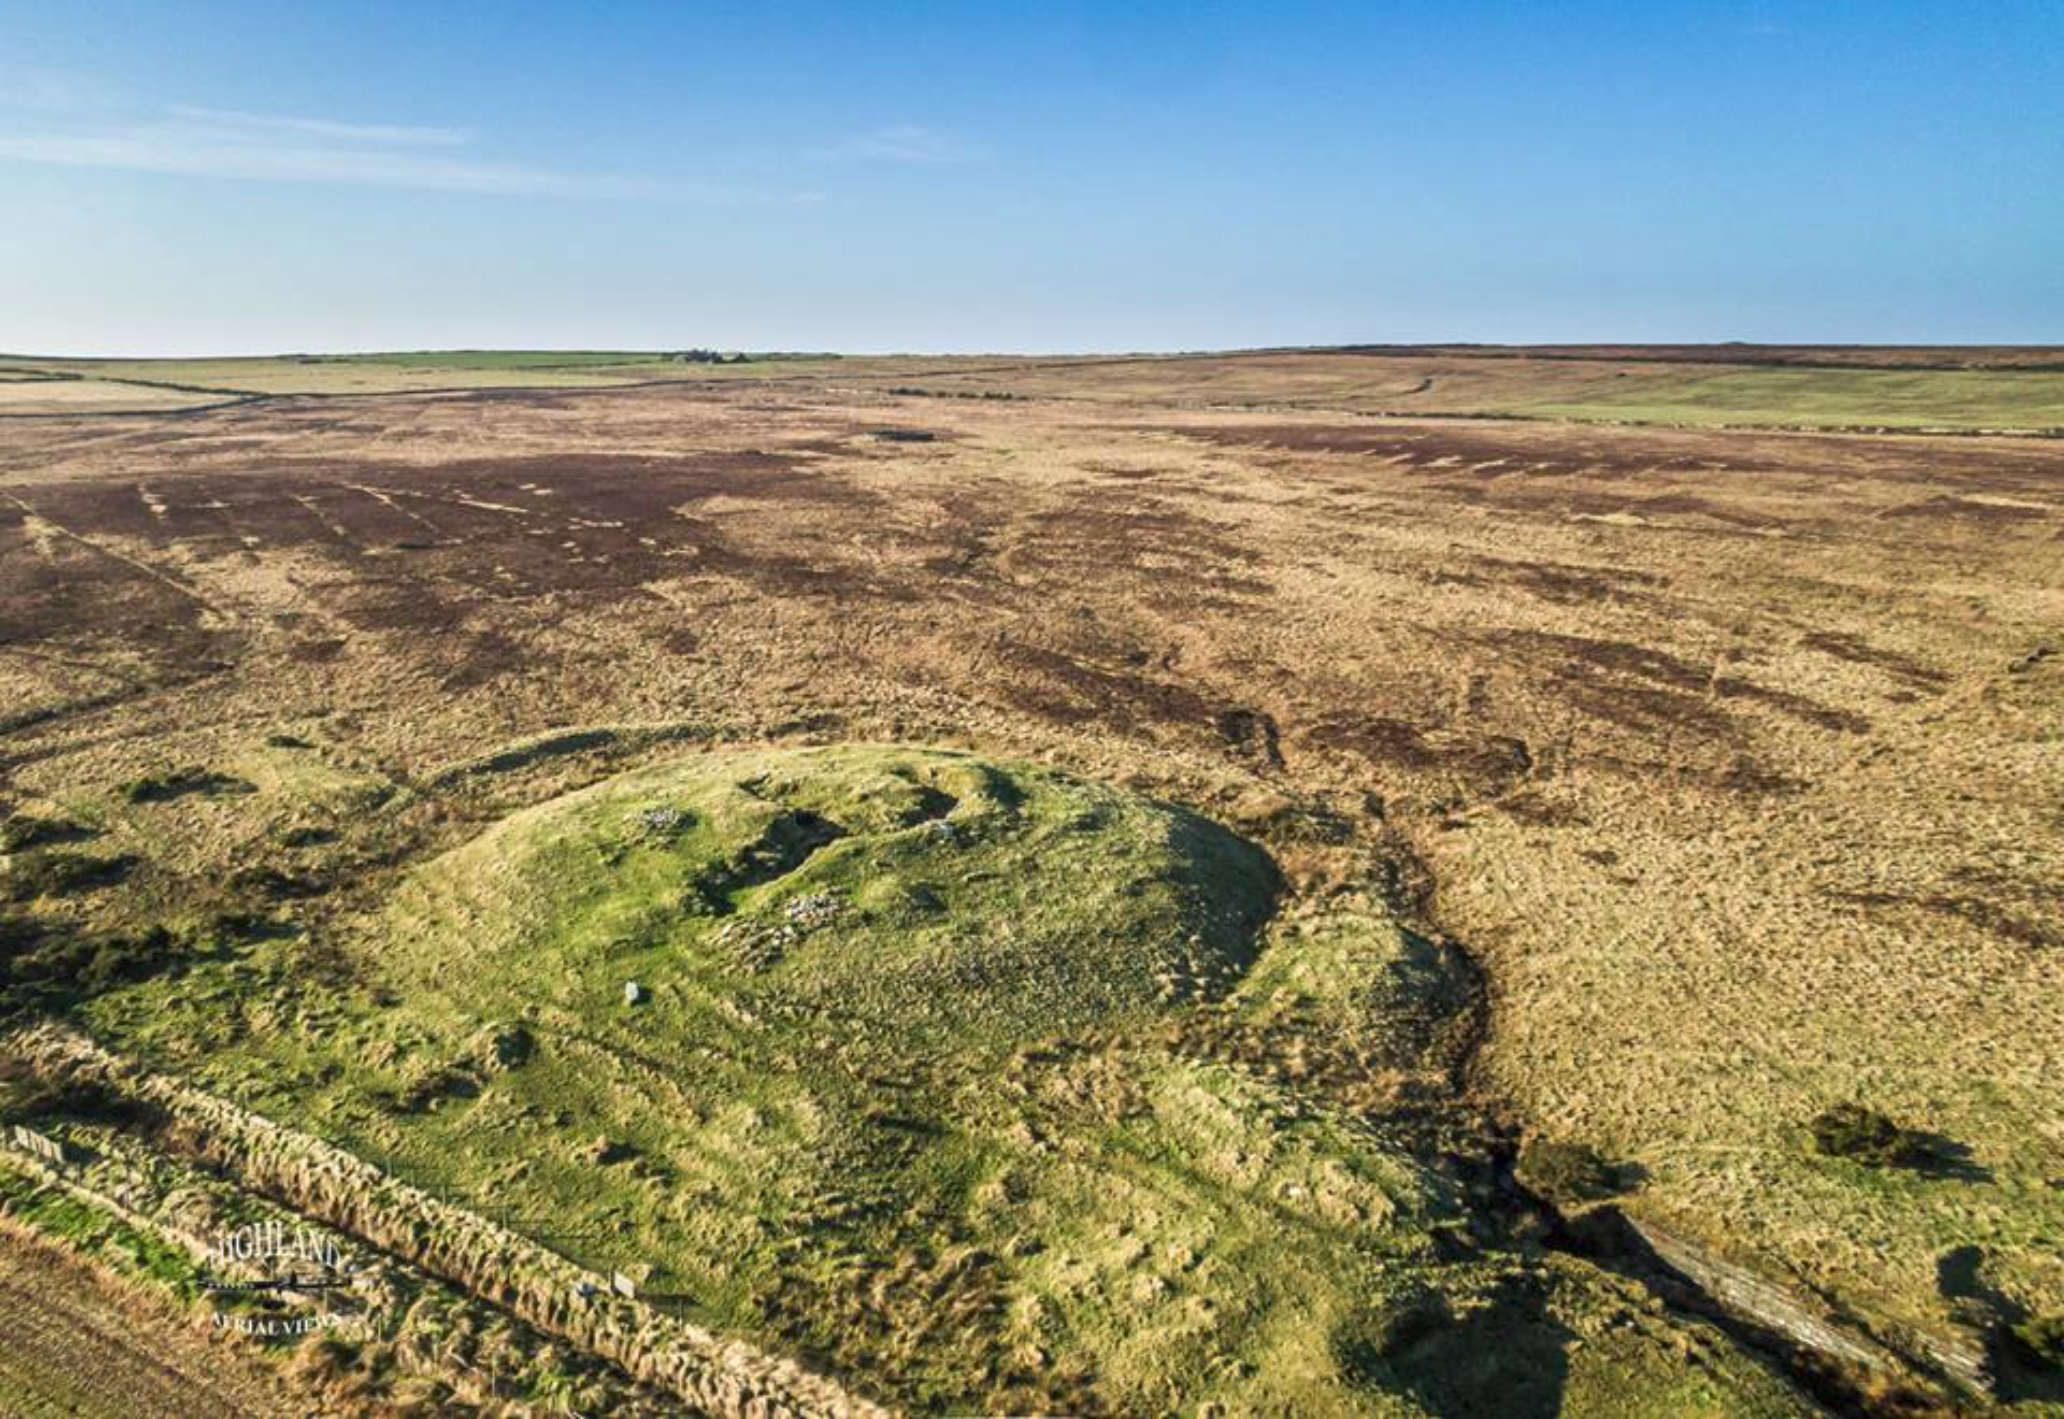 5 Reasons Why This Broch Was Caithness More Civilized Version of Holyrood